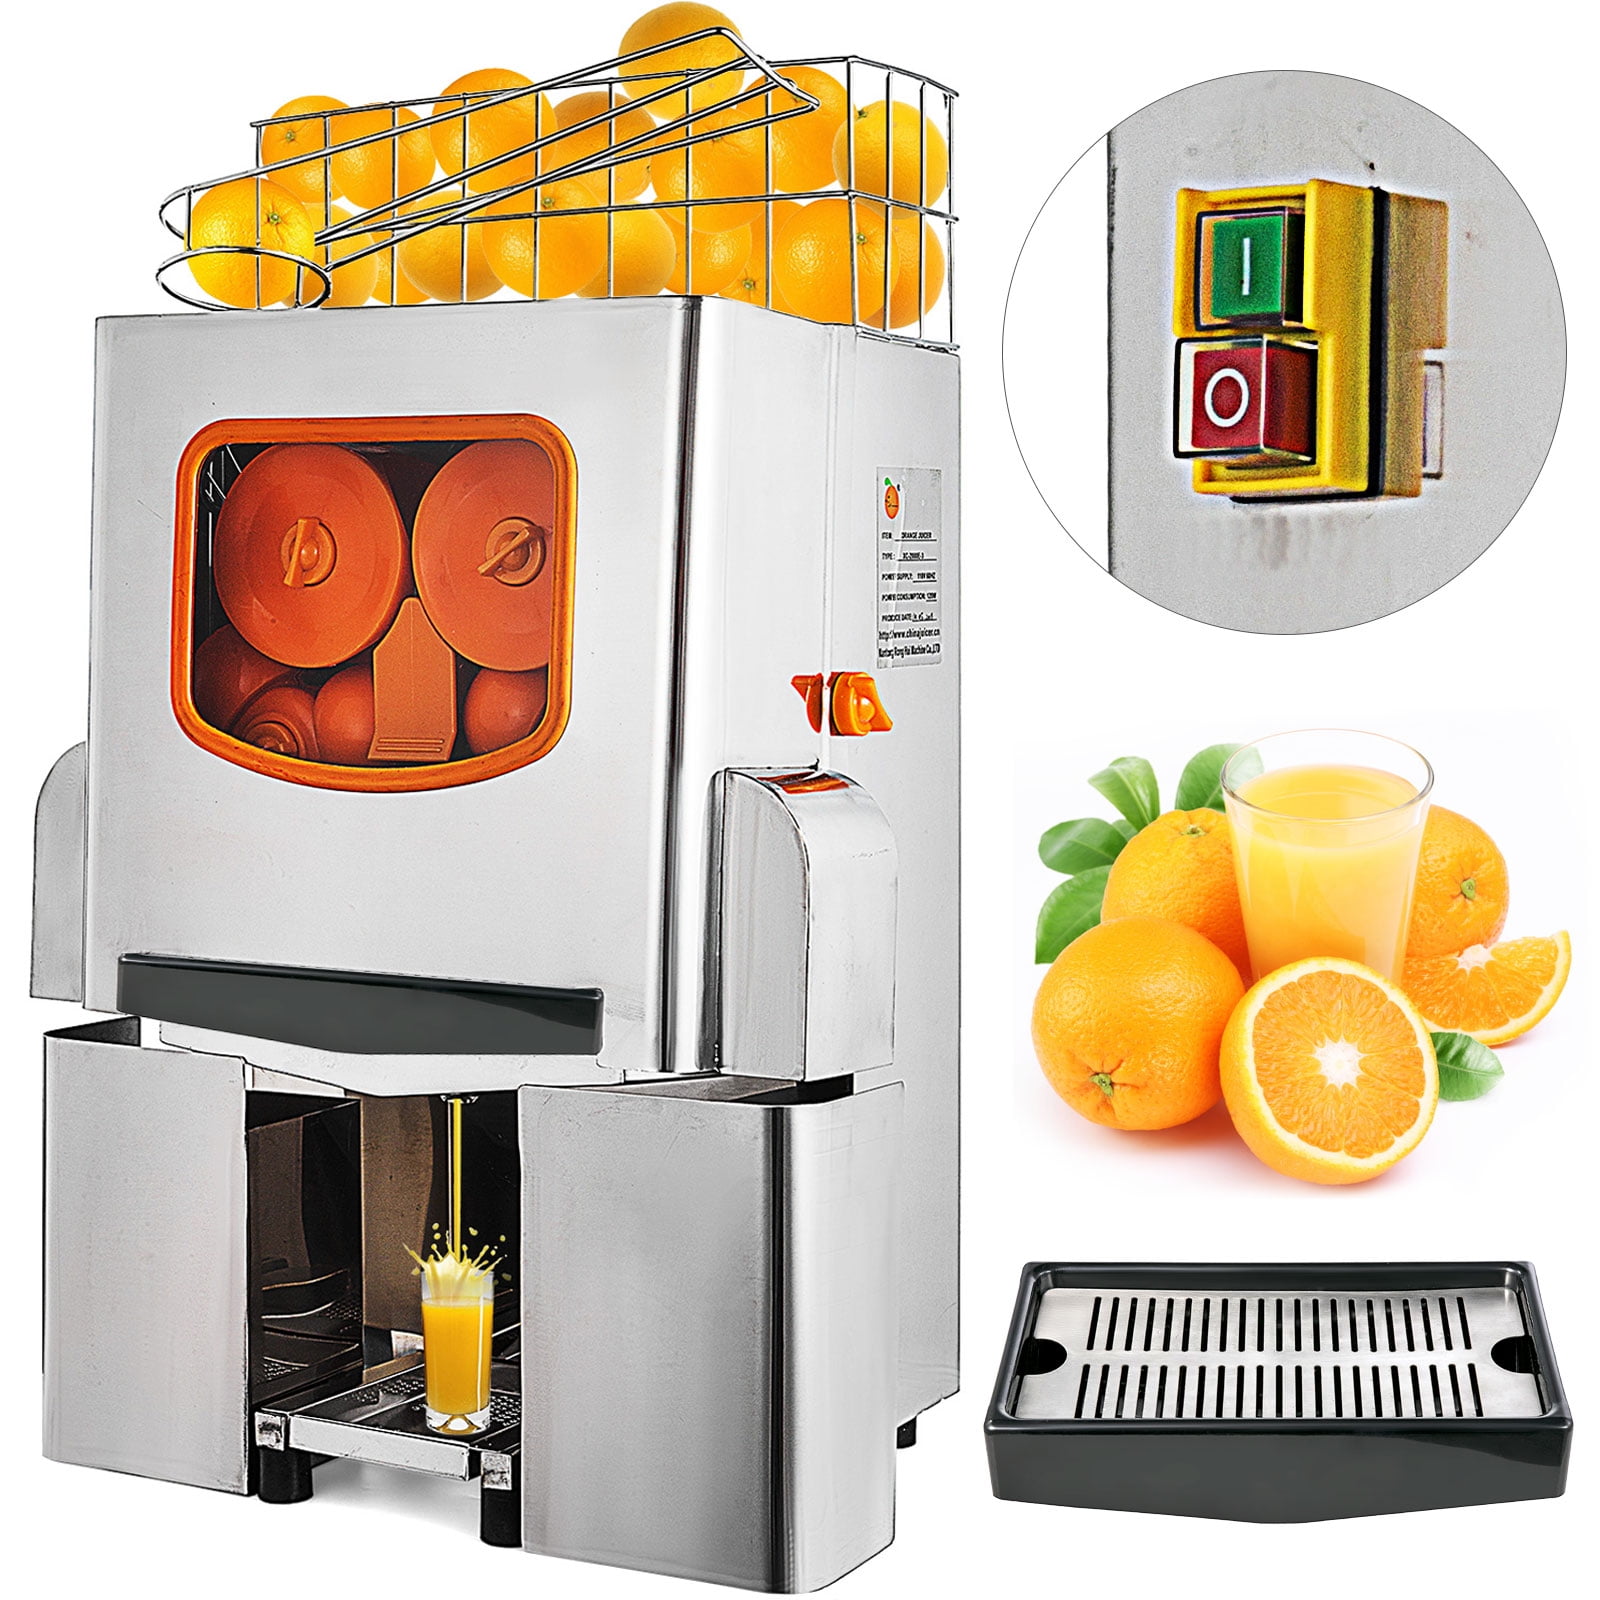 Pijnboom Soepel Koloniaal VEVOR 110V Commercial Orange Juicer Machine, With Pull-Out Filter Box,  Electric Citrus Juice Squeezer, 22-30 Oranges Per Minute, Lemon Making  Machine, 304 Stainless Steel Tank and Cover - Walmart.com